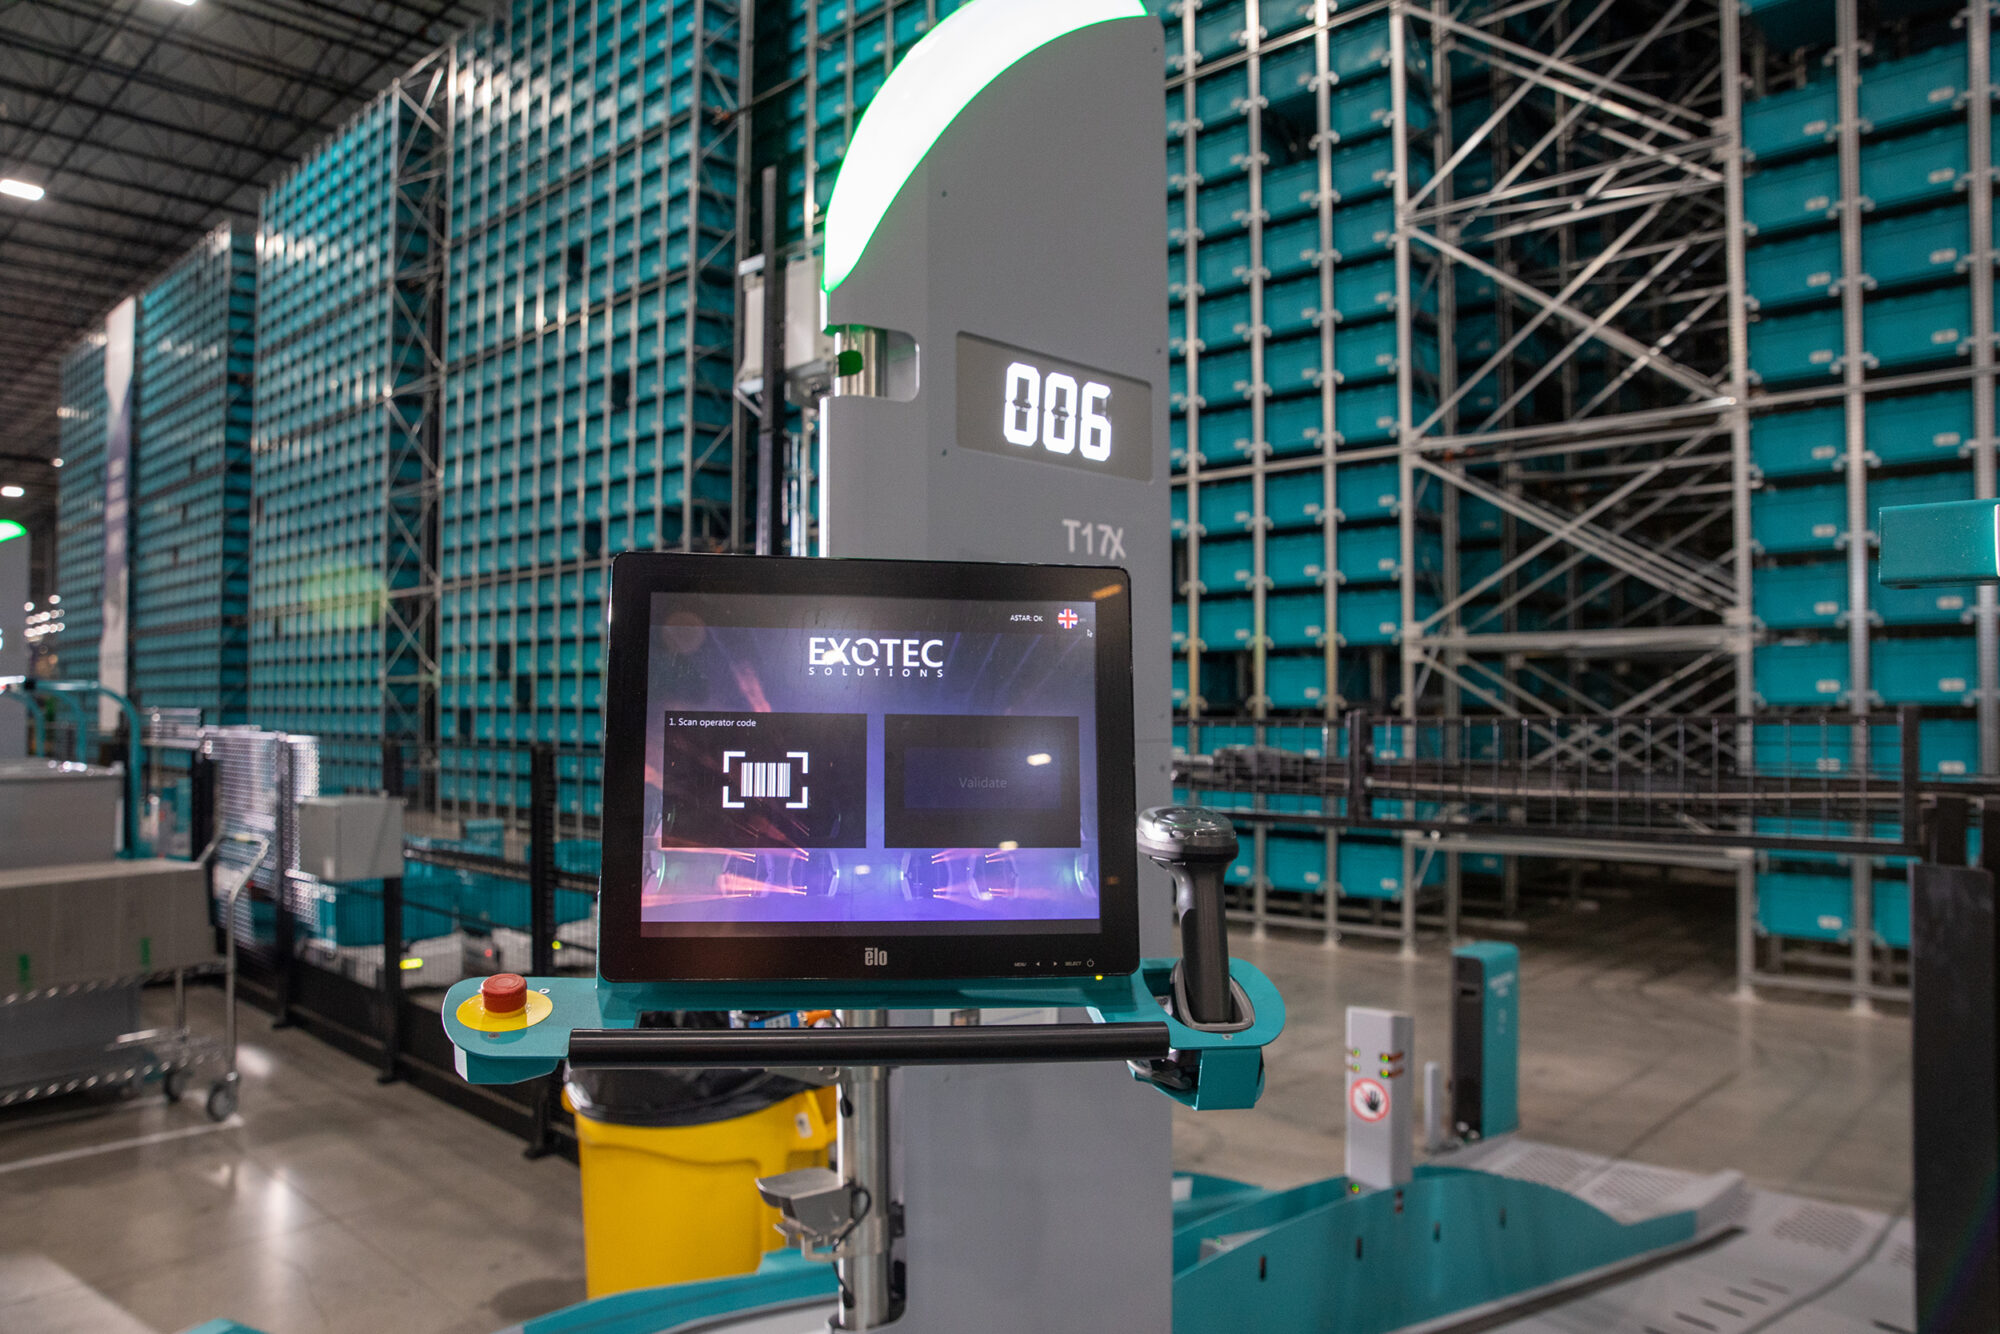 A warehouse conveyor system station control screen.